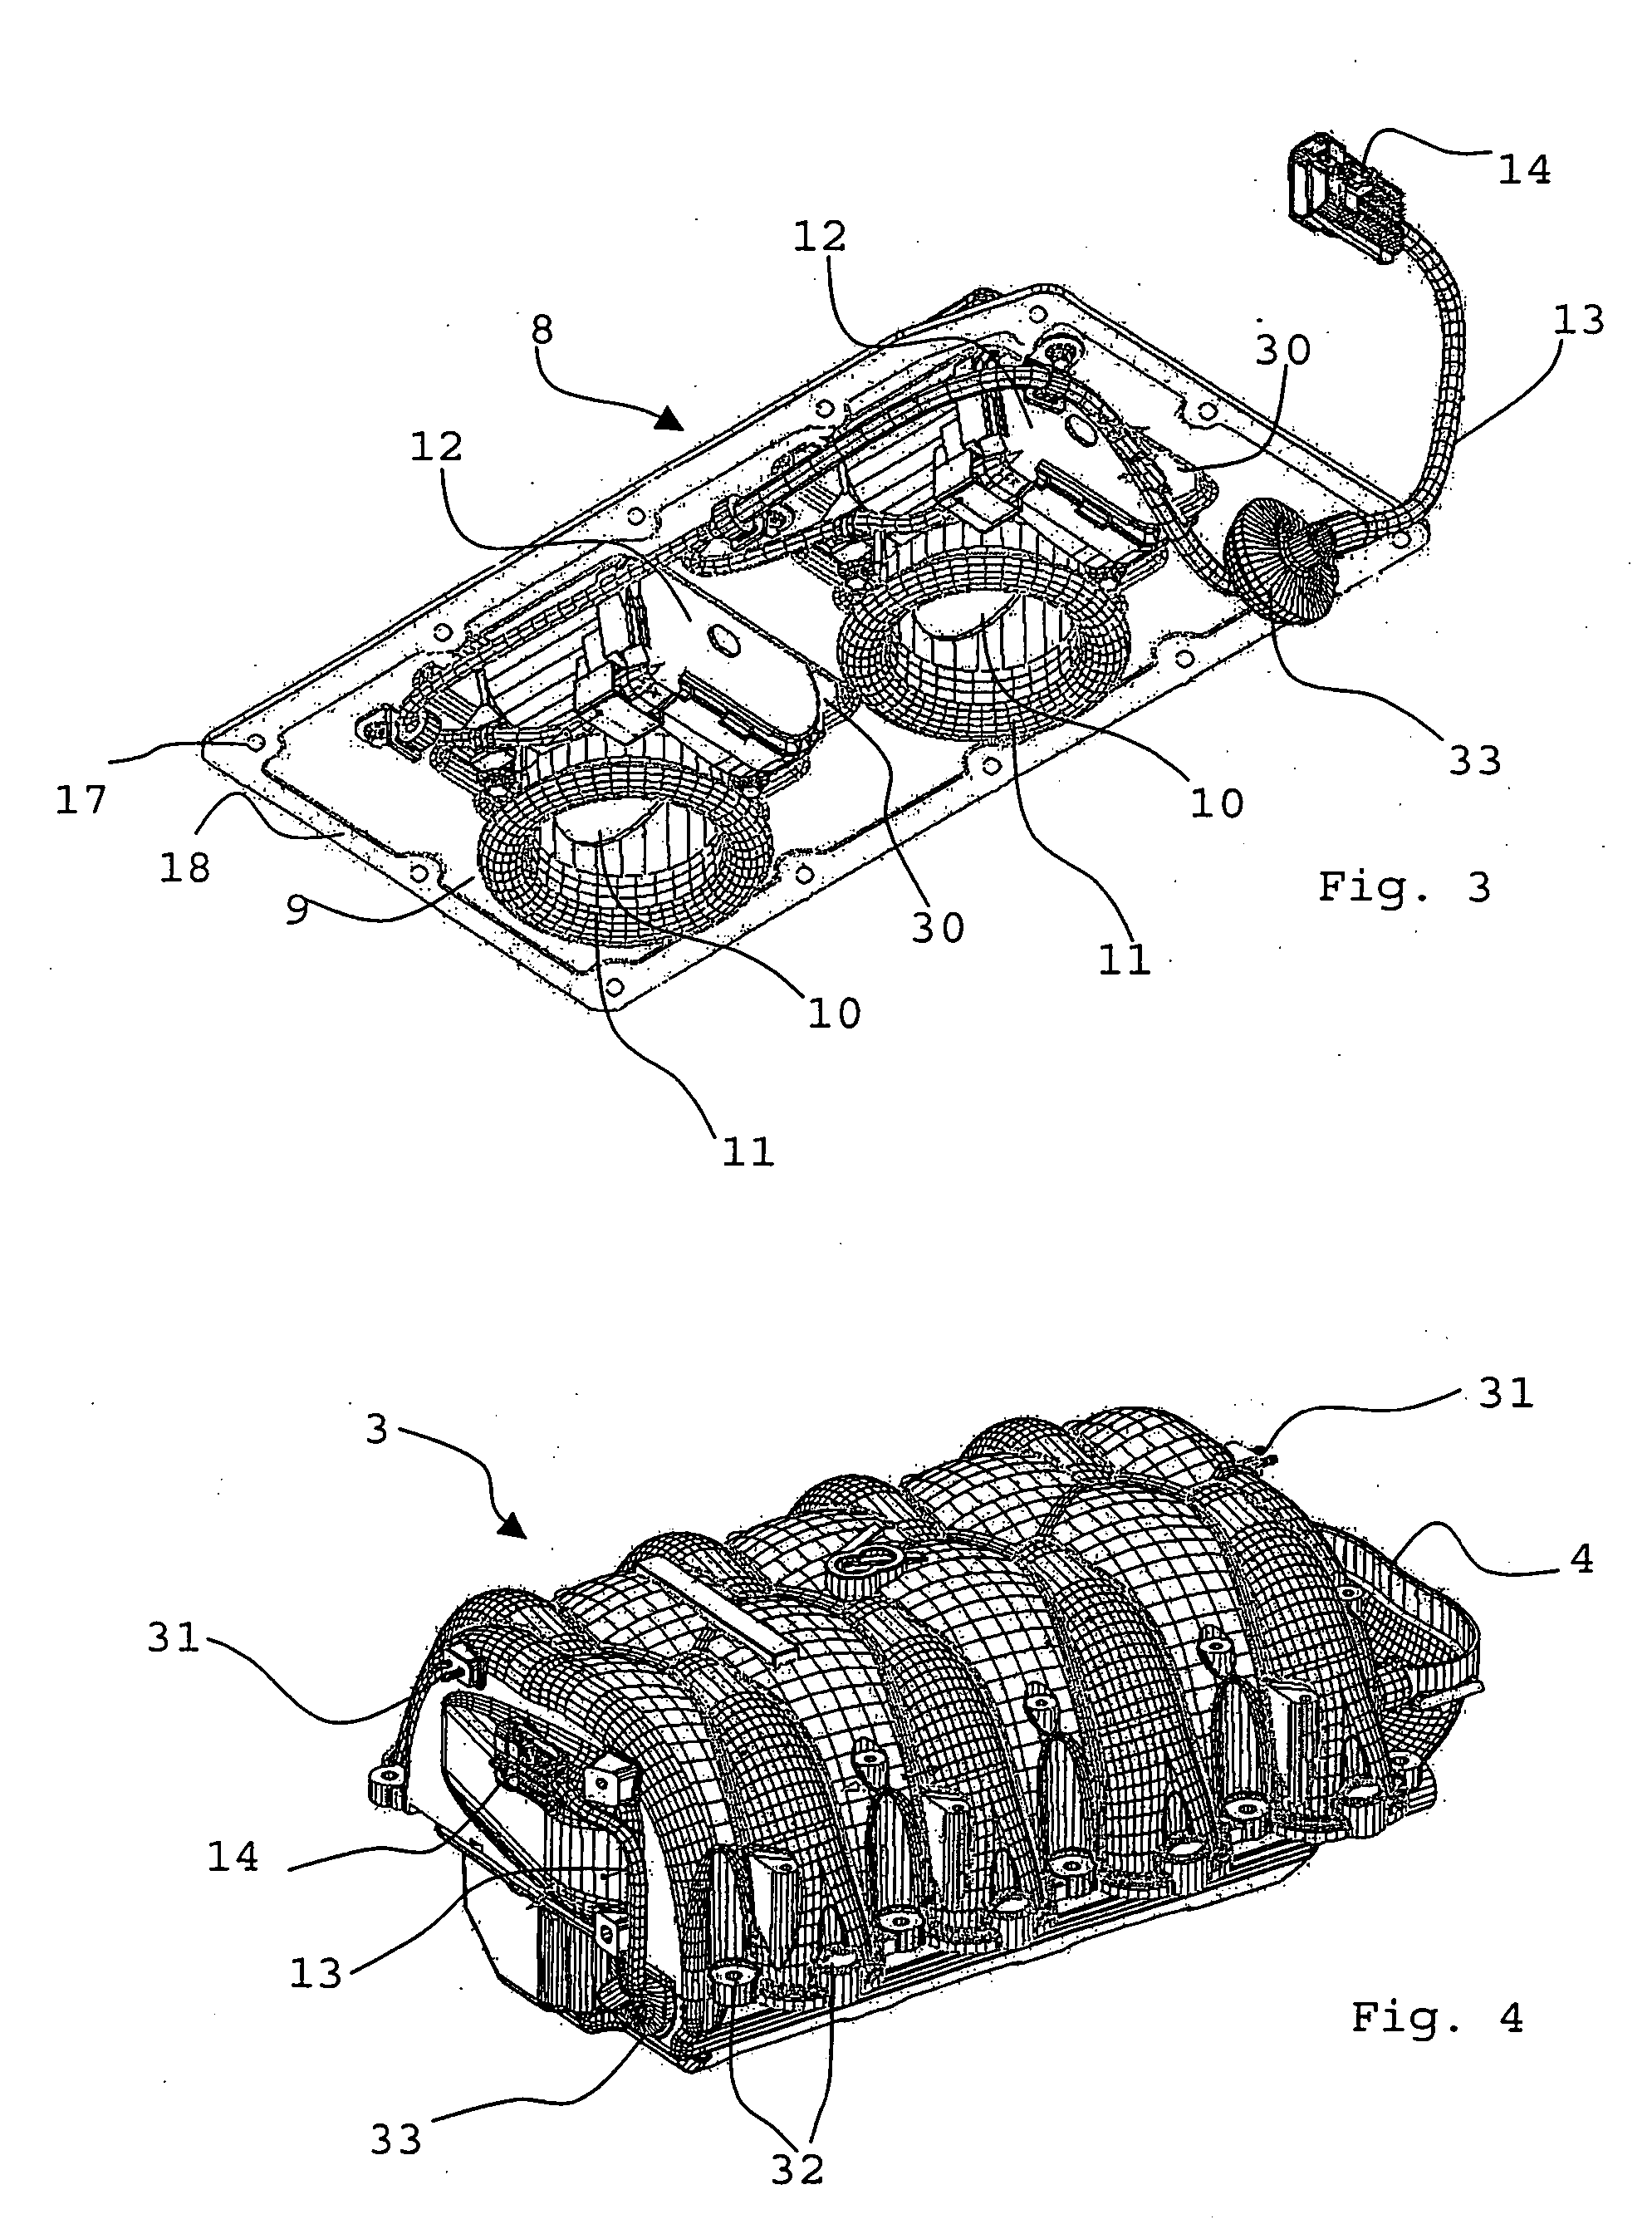 Intake module for an internal combustion engine